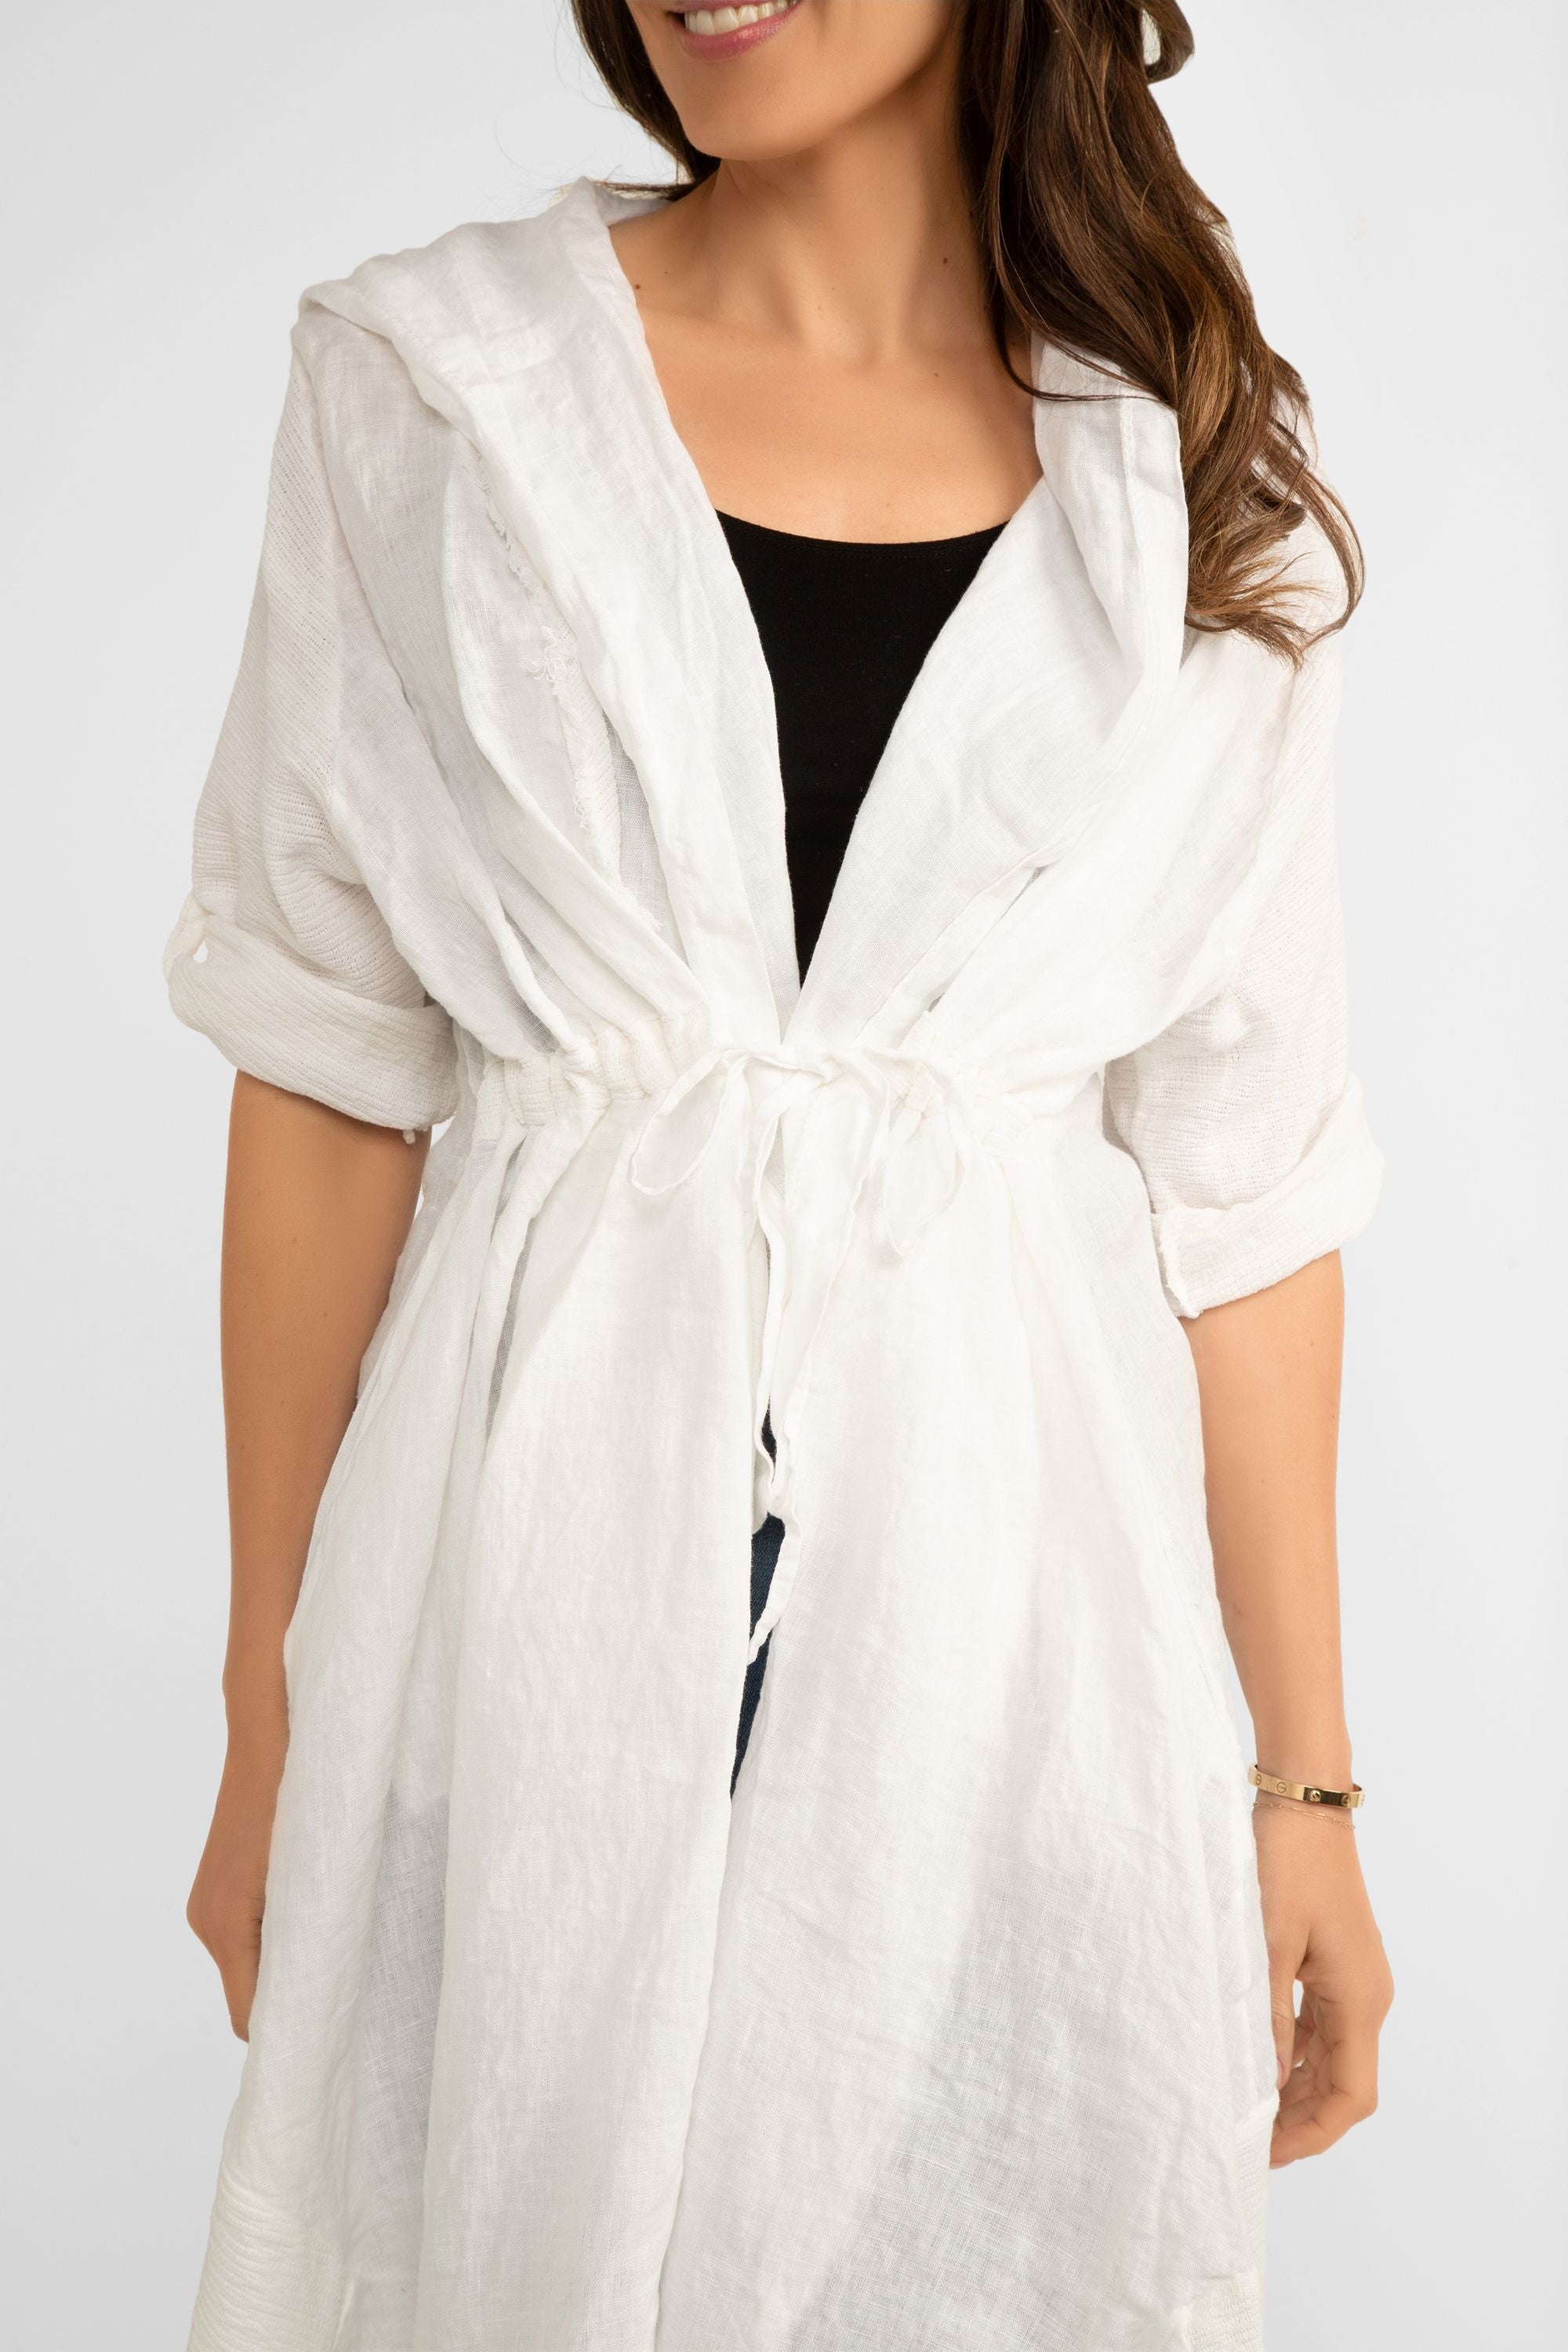 Close up front view of Me & Gee Women's Hooded Summer Cover-Up With Short Roll Tab Sleeves in White